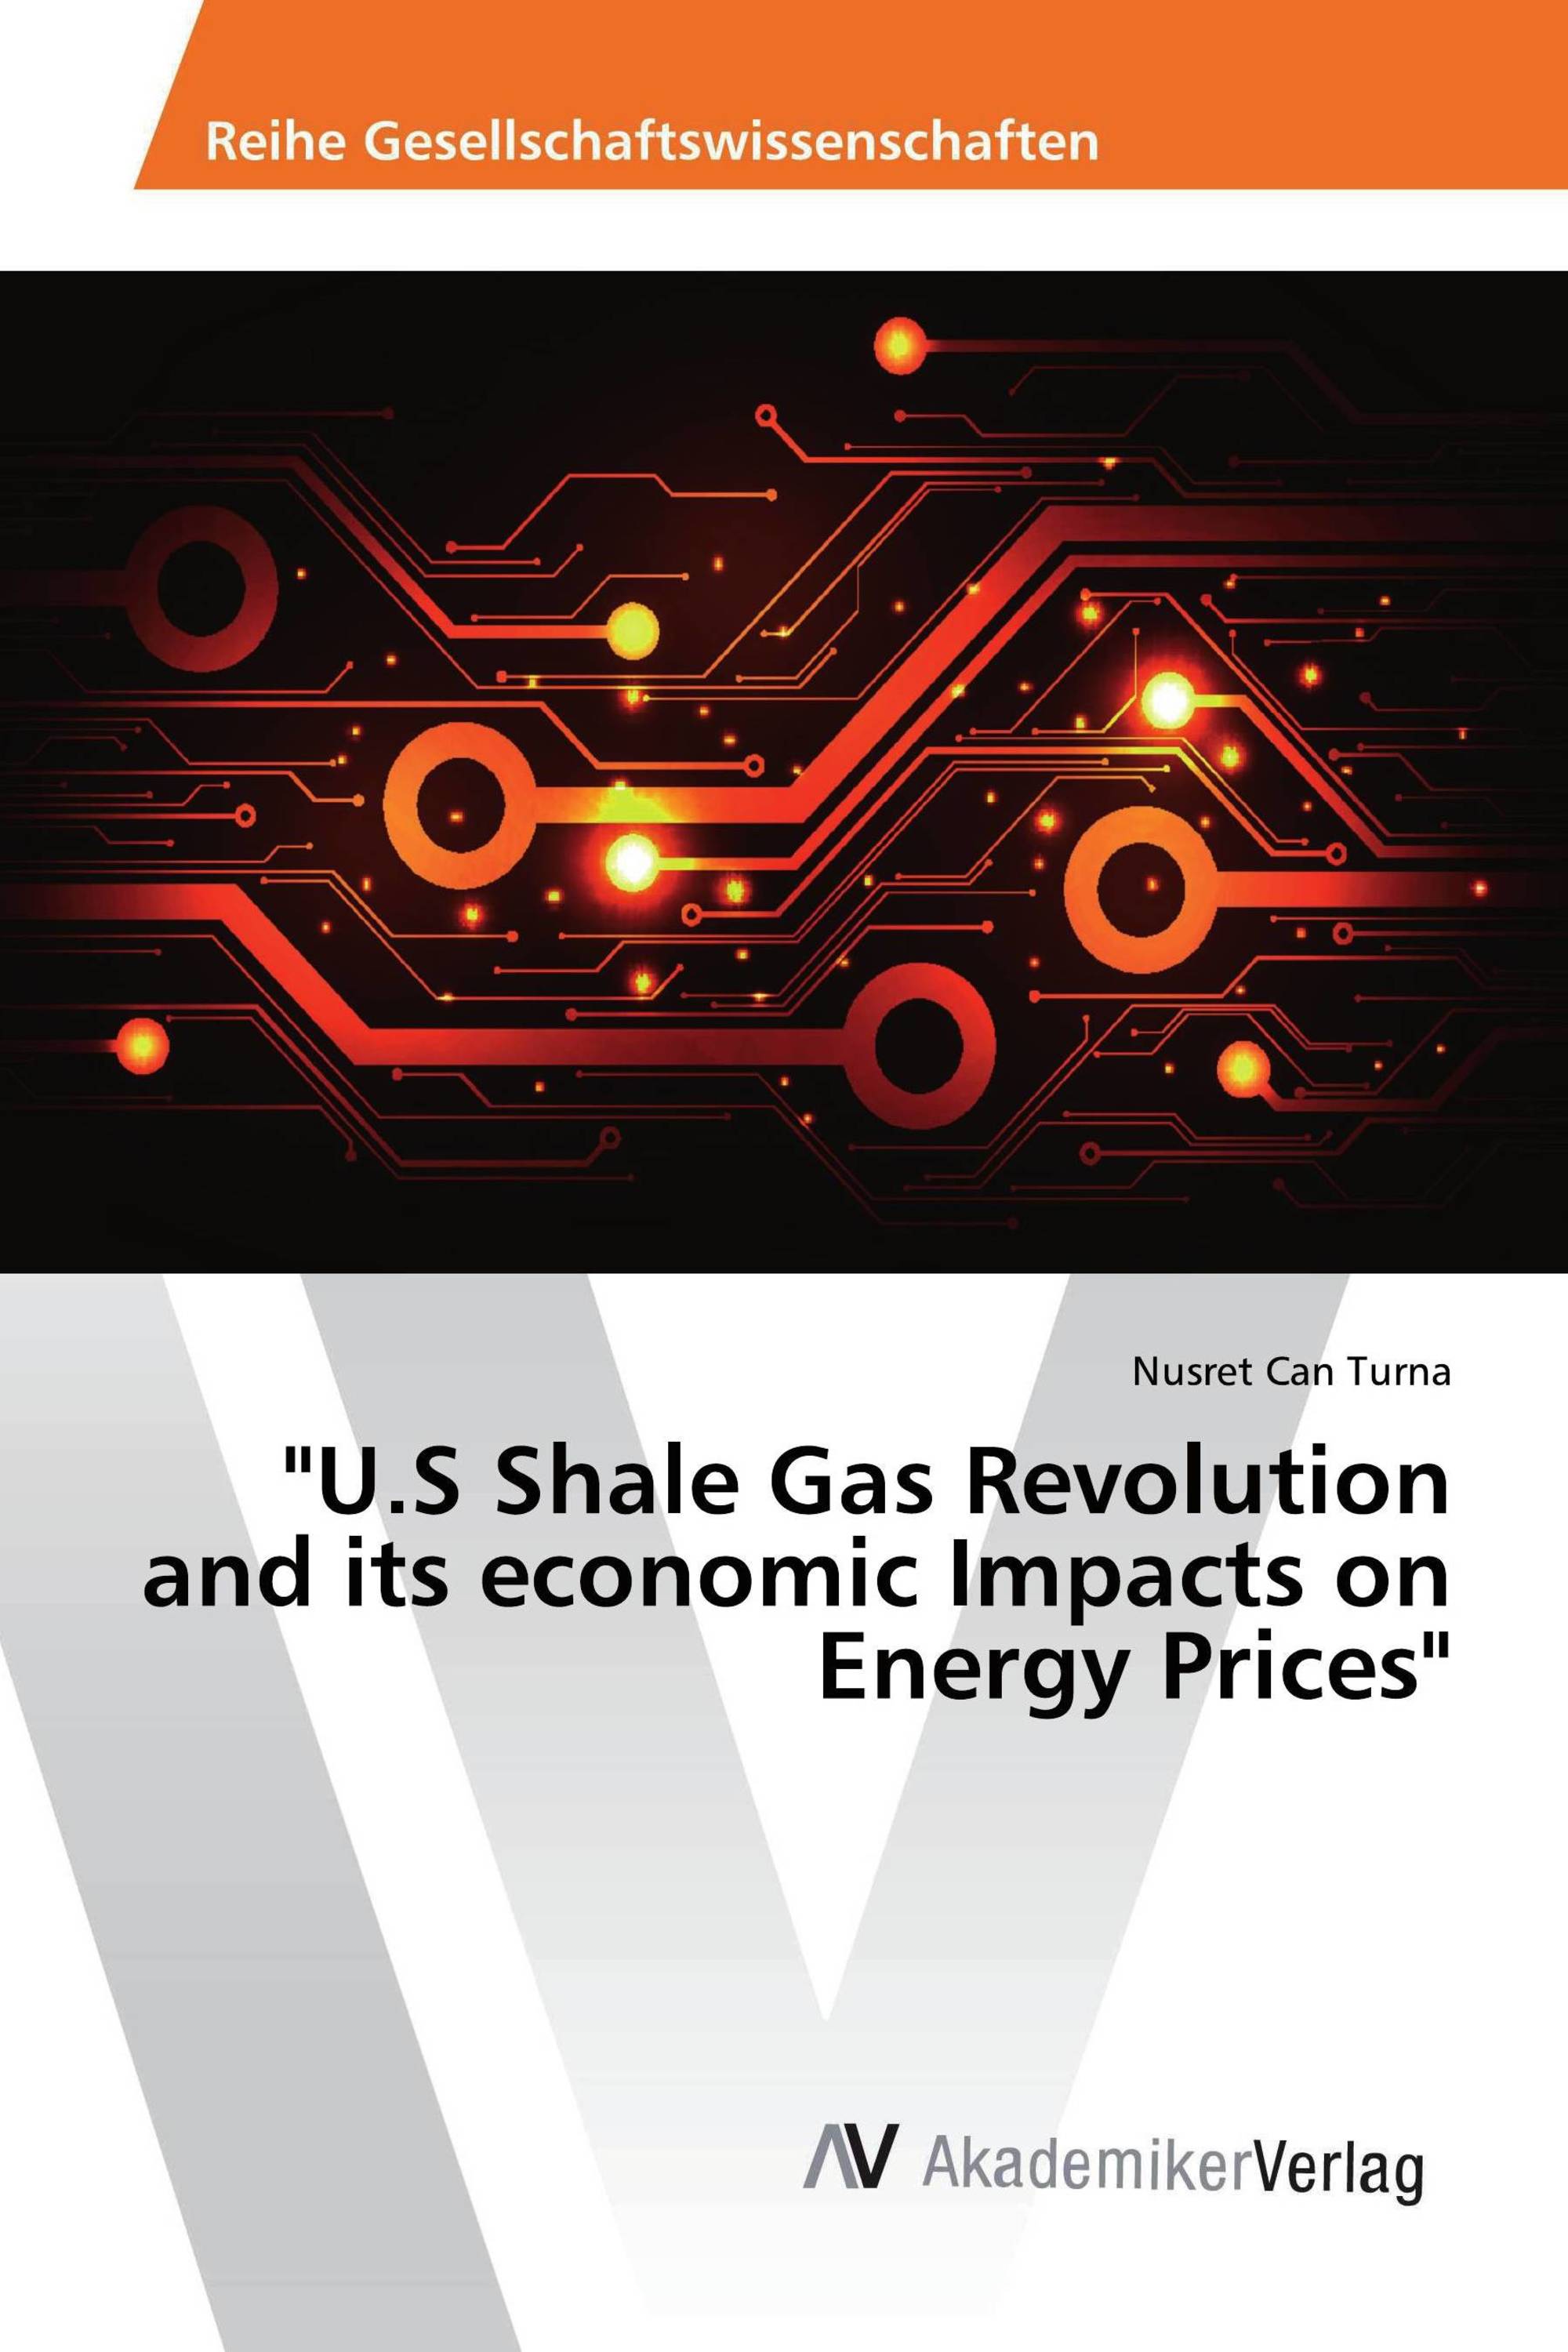 "U.S Shale Gas Revolution and its economic Impacts on Energy Prices"